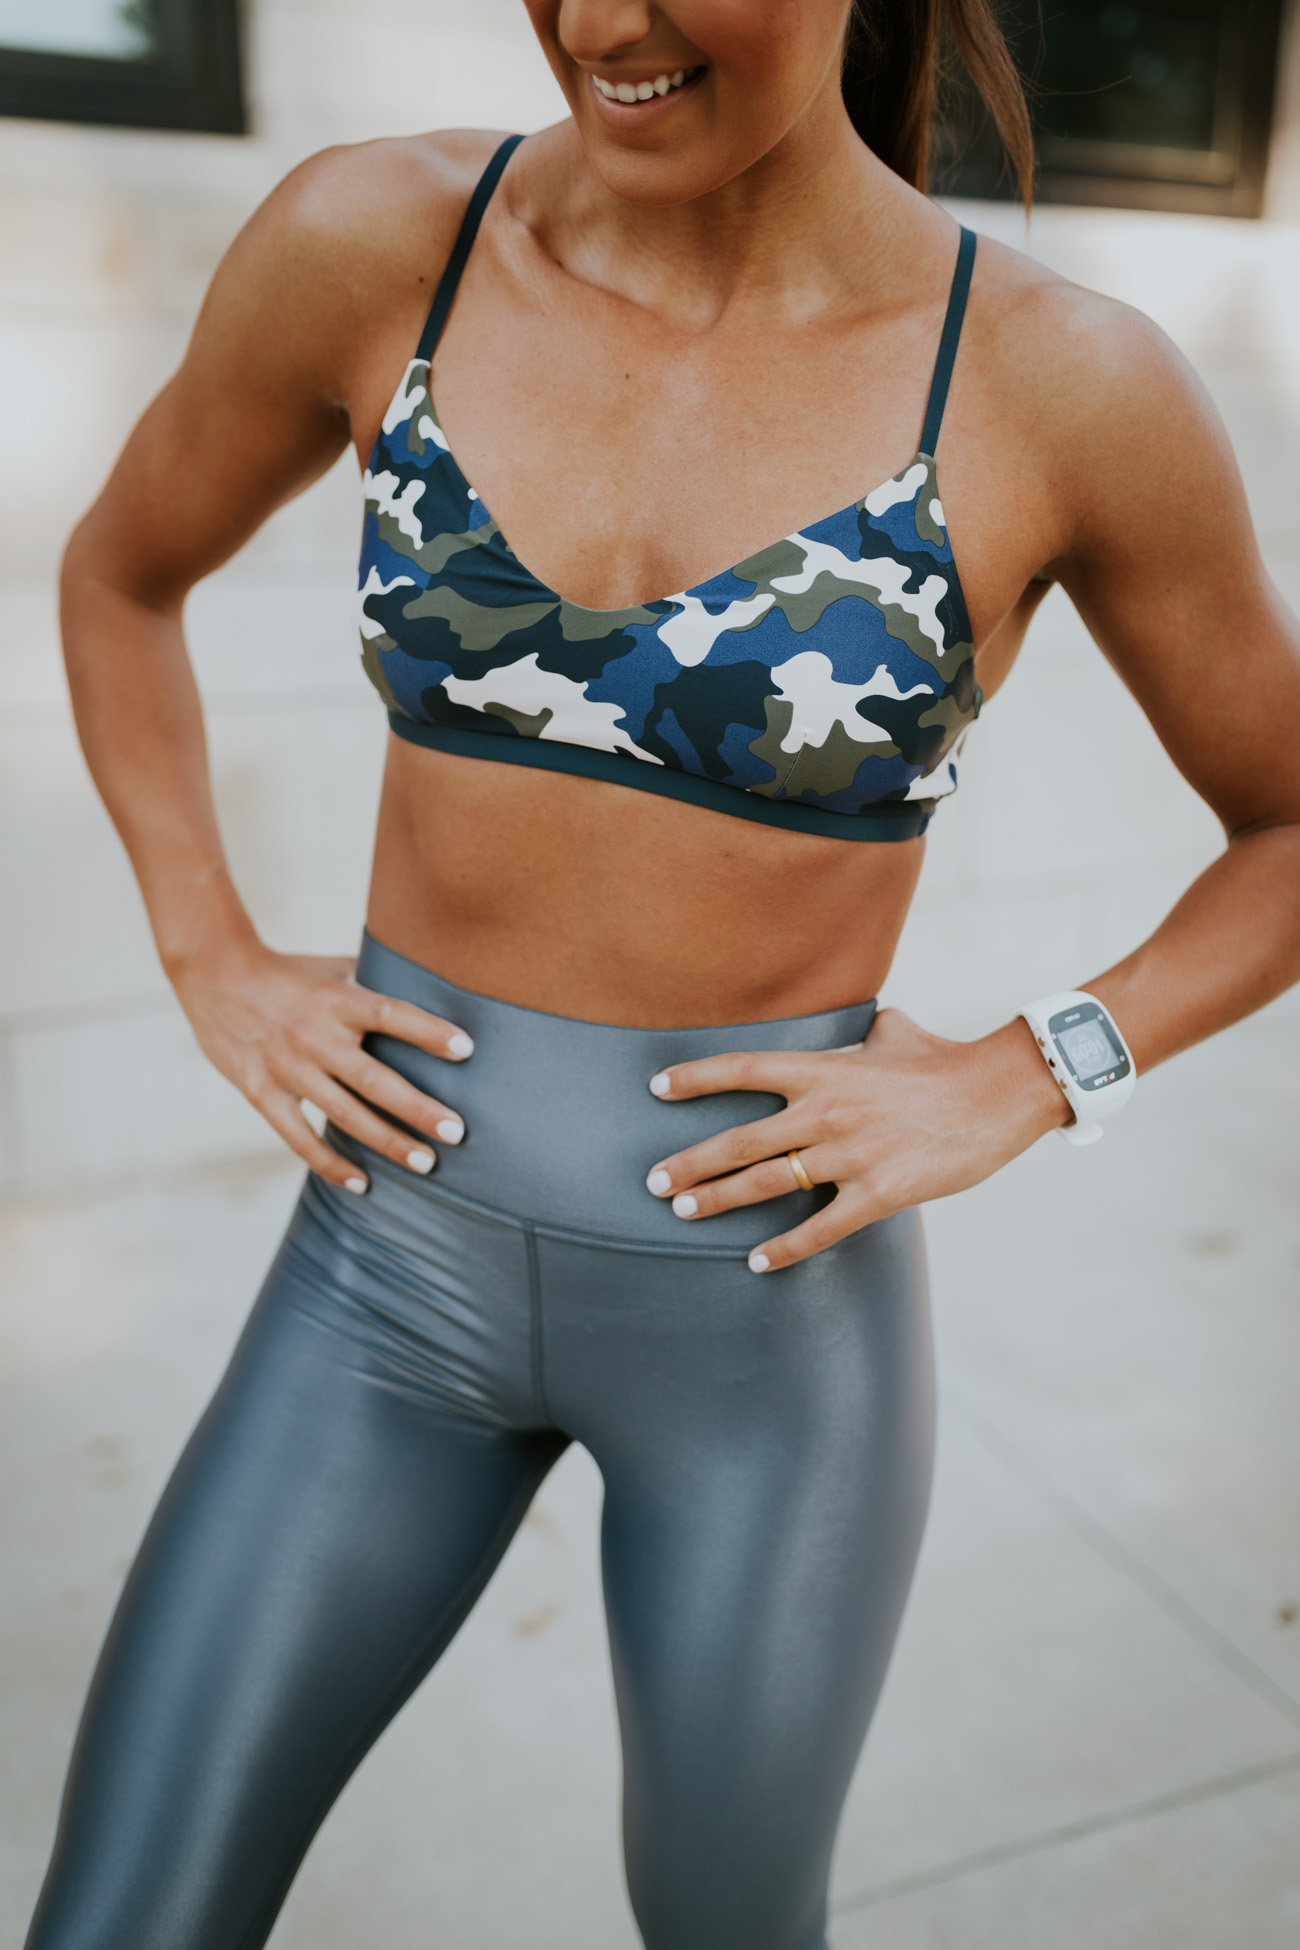 camo sports bra, carbon 28 takara legging, faux leather leggings, fitwithasd, a southern drawl fitness, cute activewear, workout plan, fitspiration, nutrition guide, macro counting, nike epic react shoe, athleisure style, how to get in shape // grace white a southern drawl